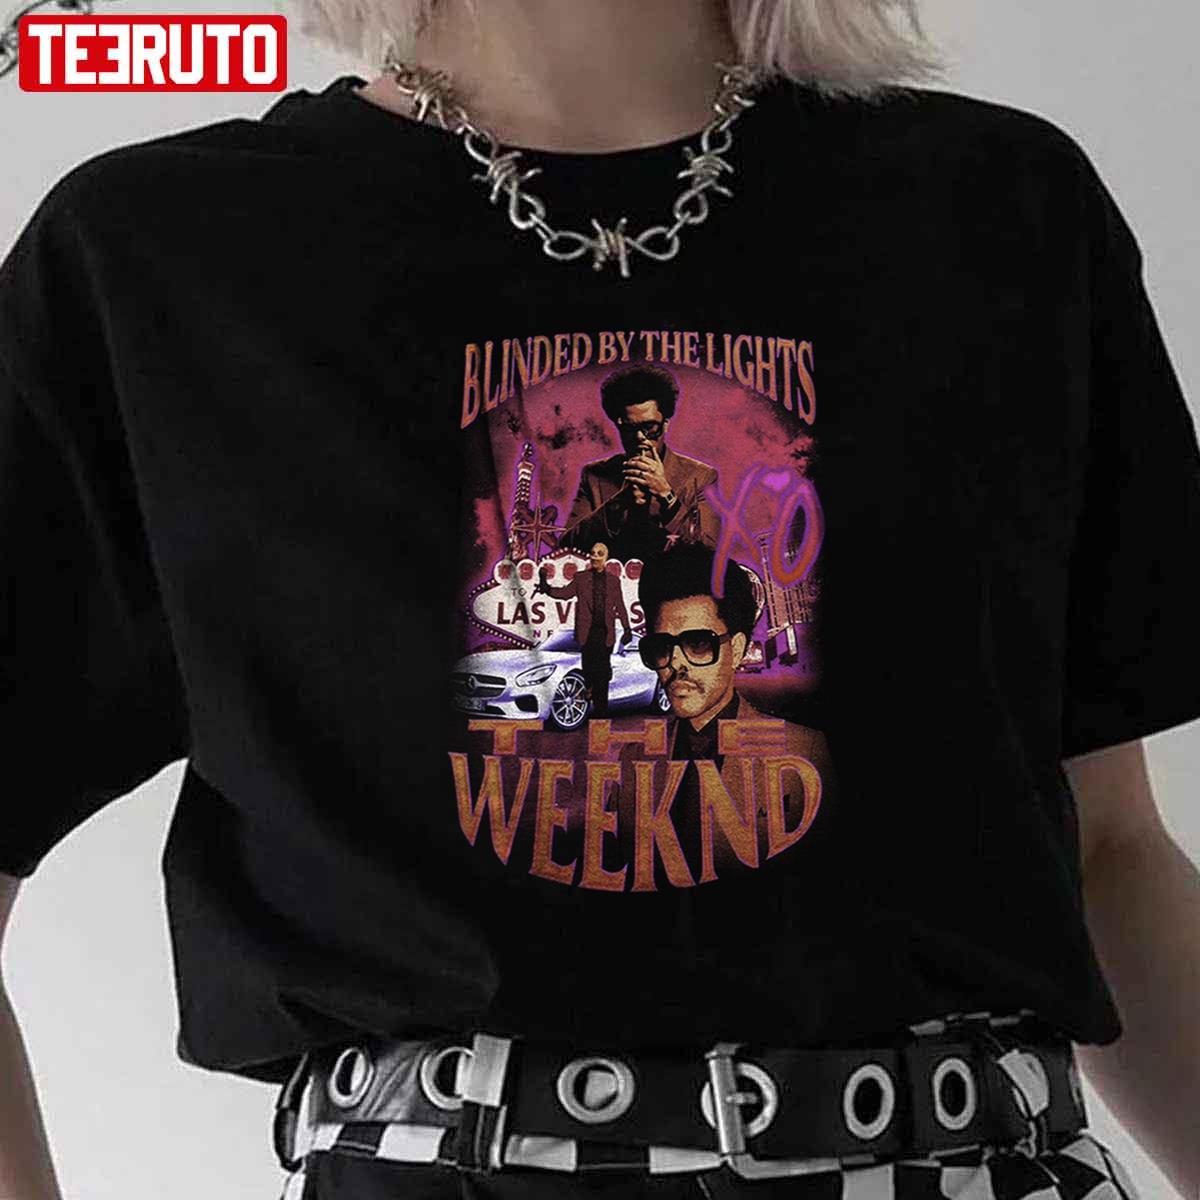 The Weeknd Retro Vintage Blinded By The Lights Unisex T-Shirt